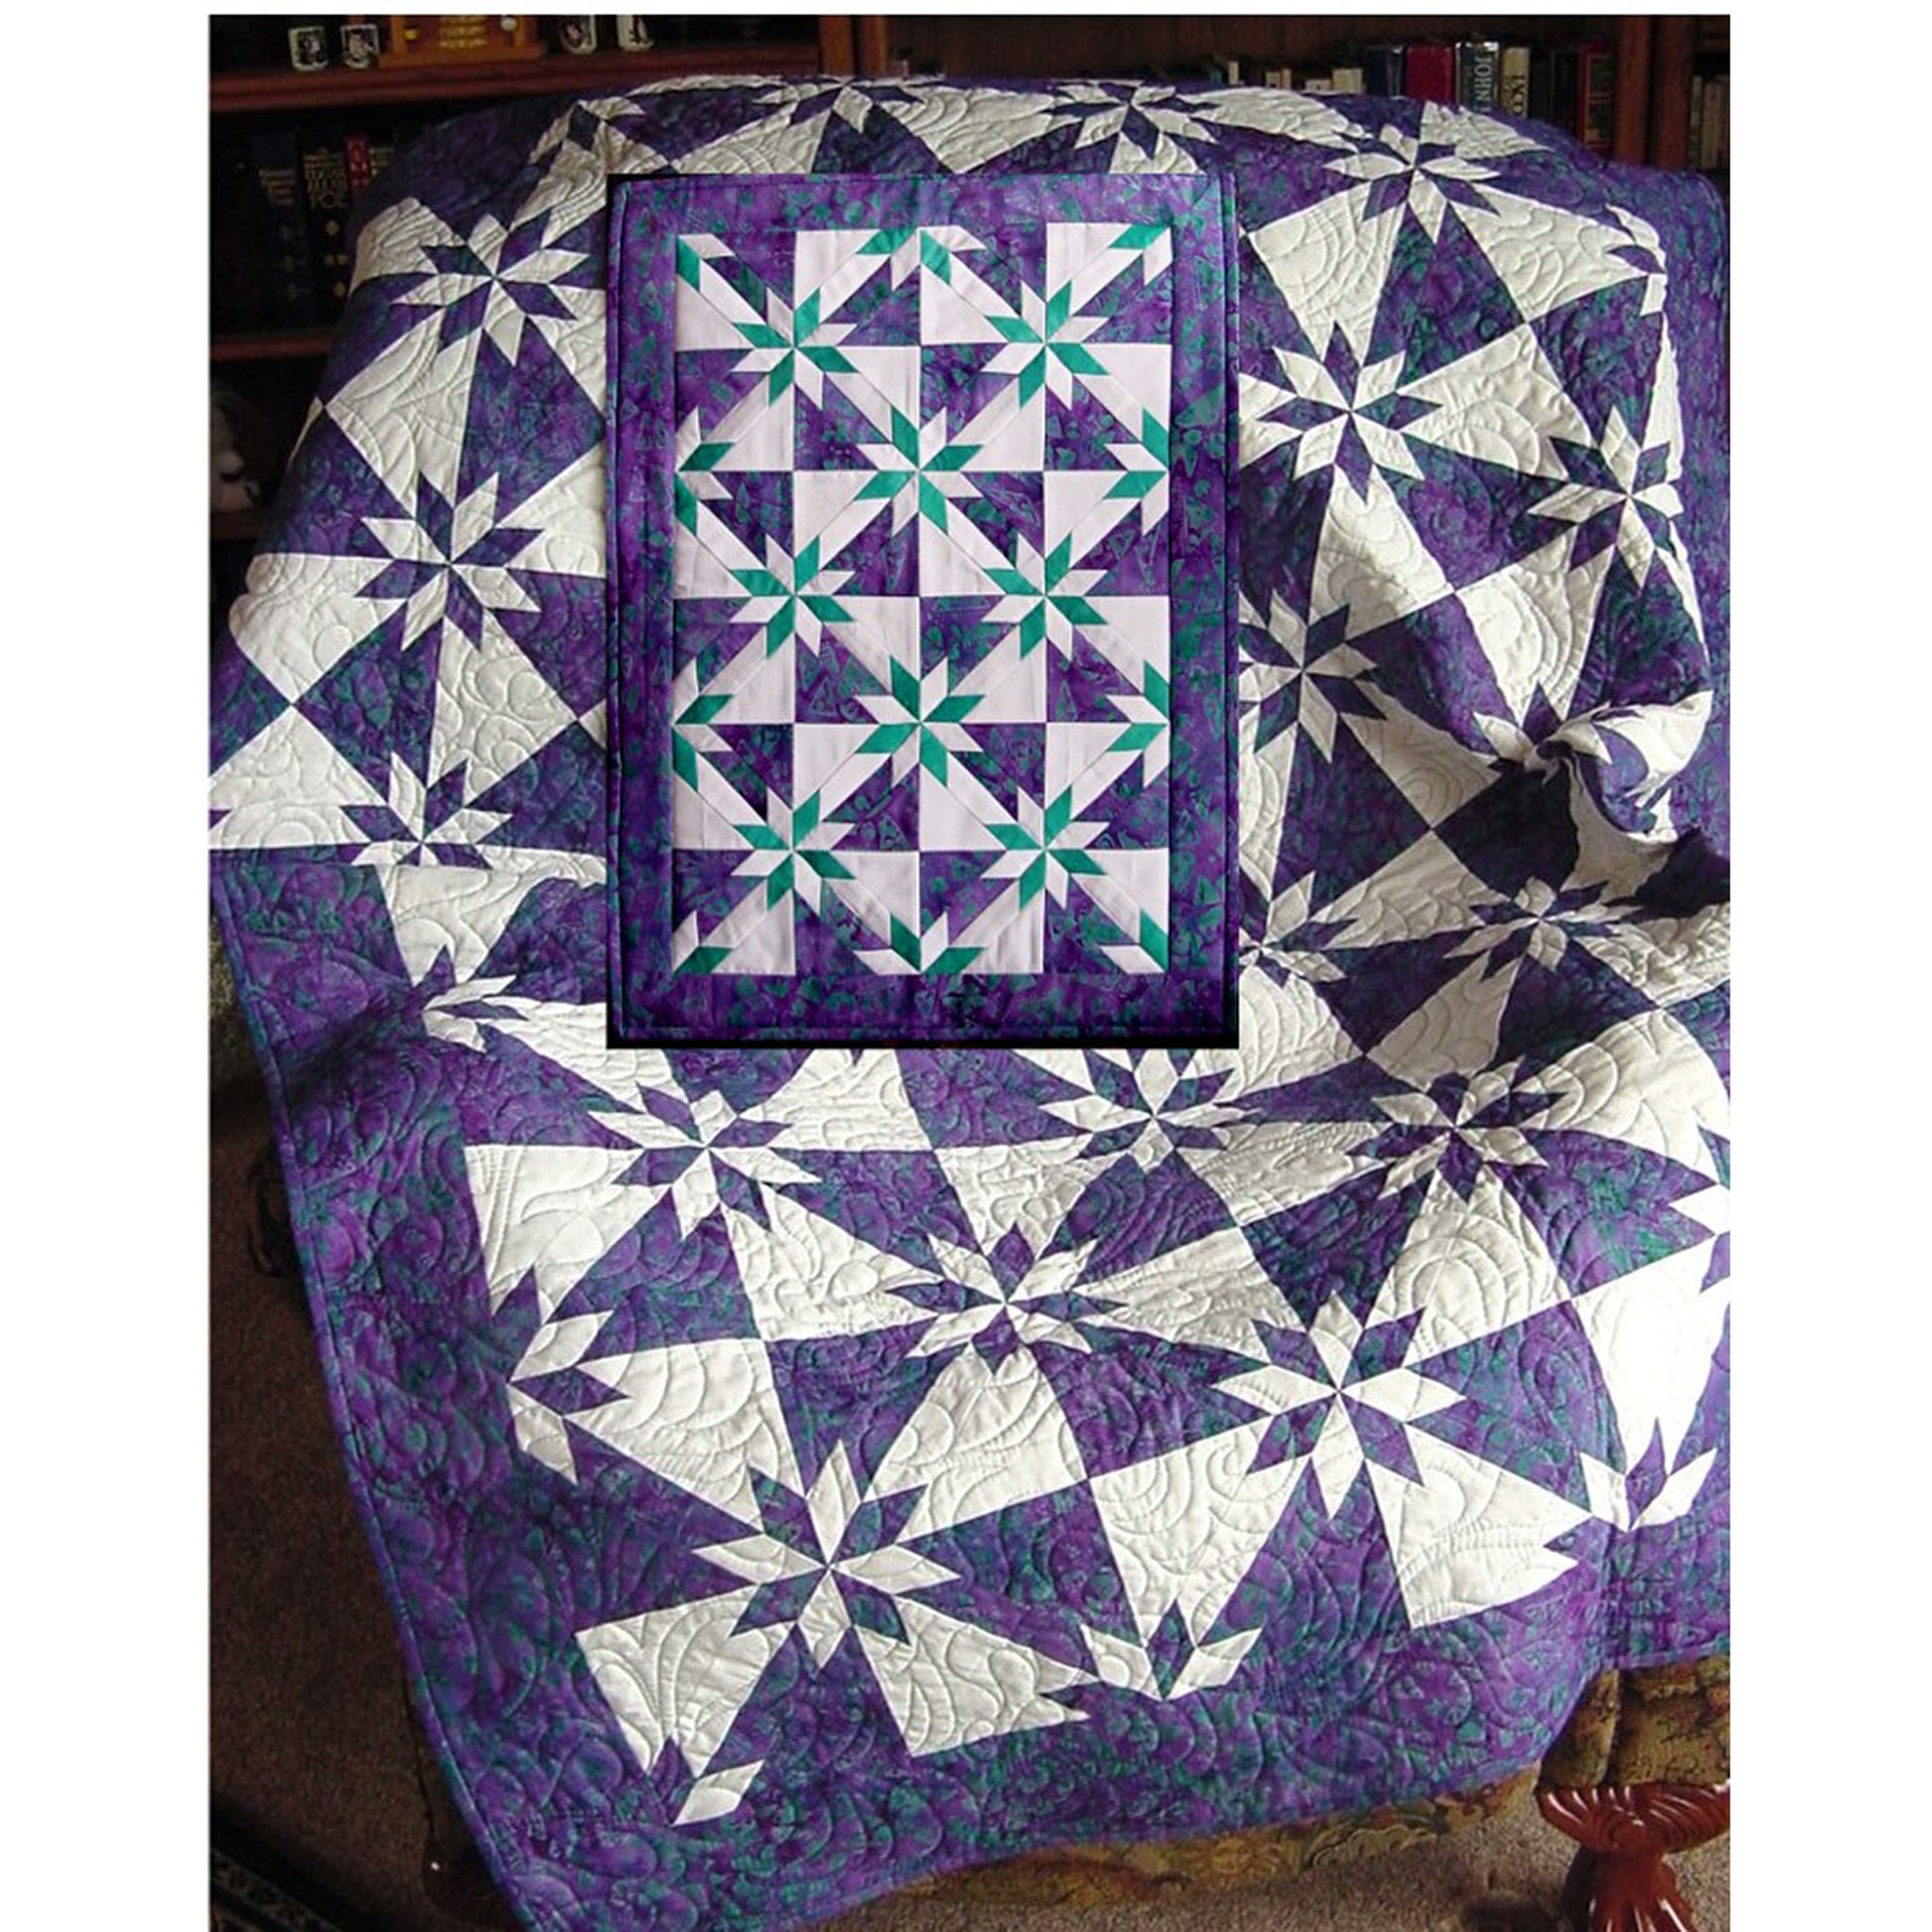 Quilt in purple and white showcasing a star pattern, hunter's star block style. Small image inset shows quilt pattern done in purple and white backgound with teal and white stars. 